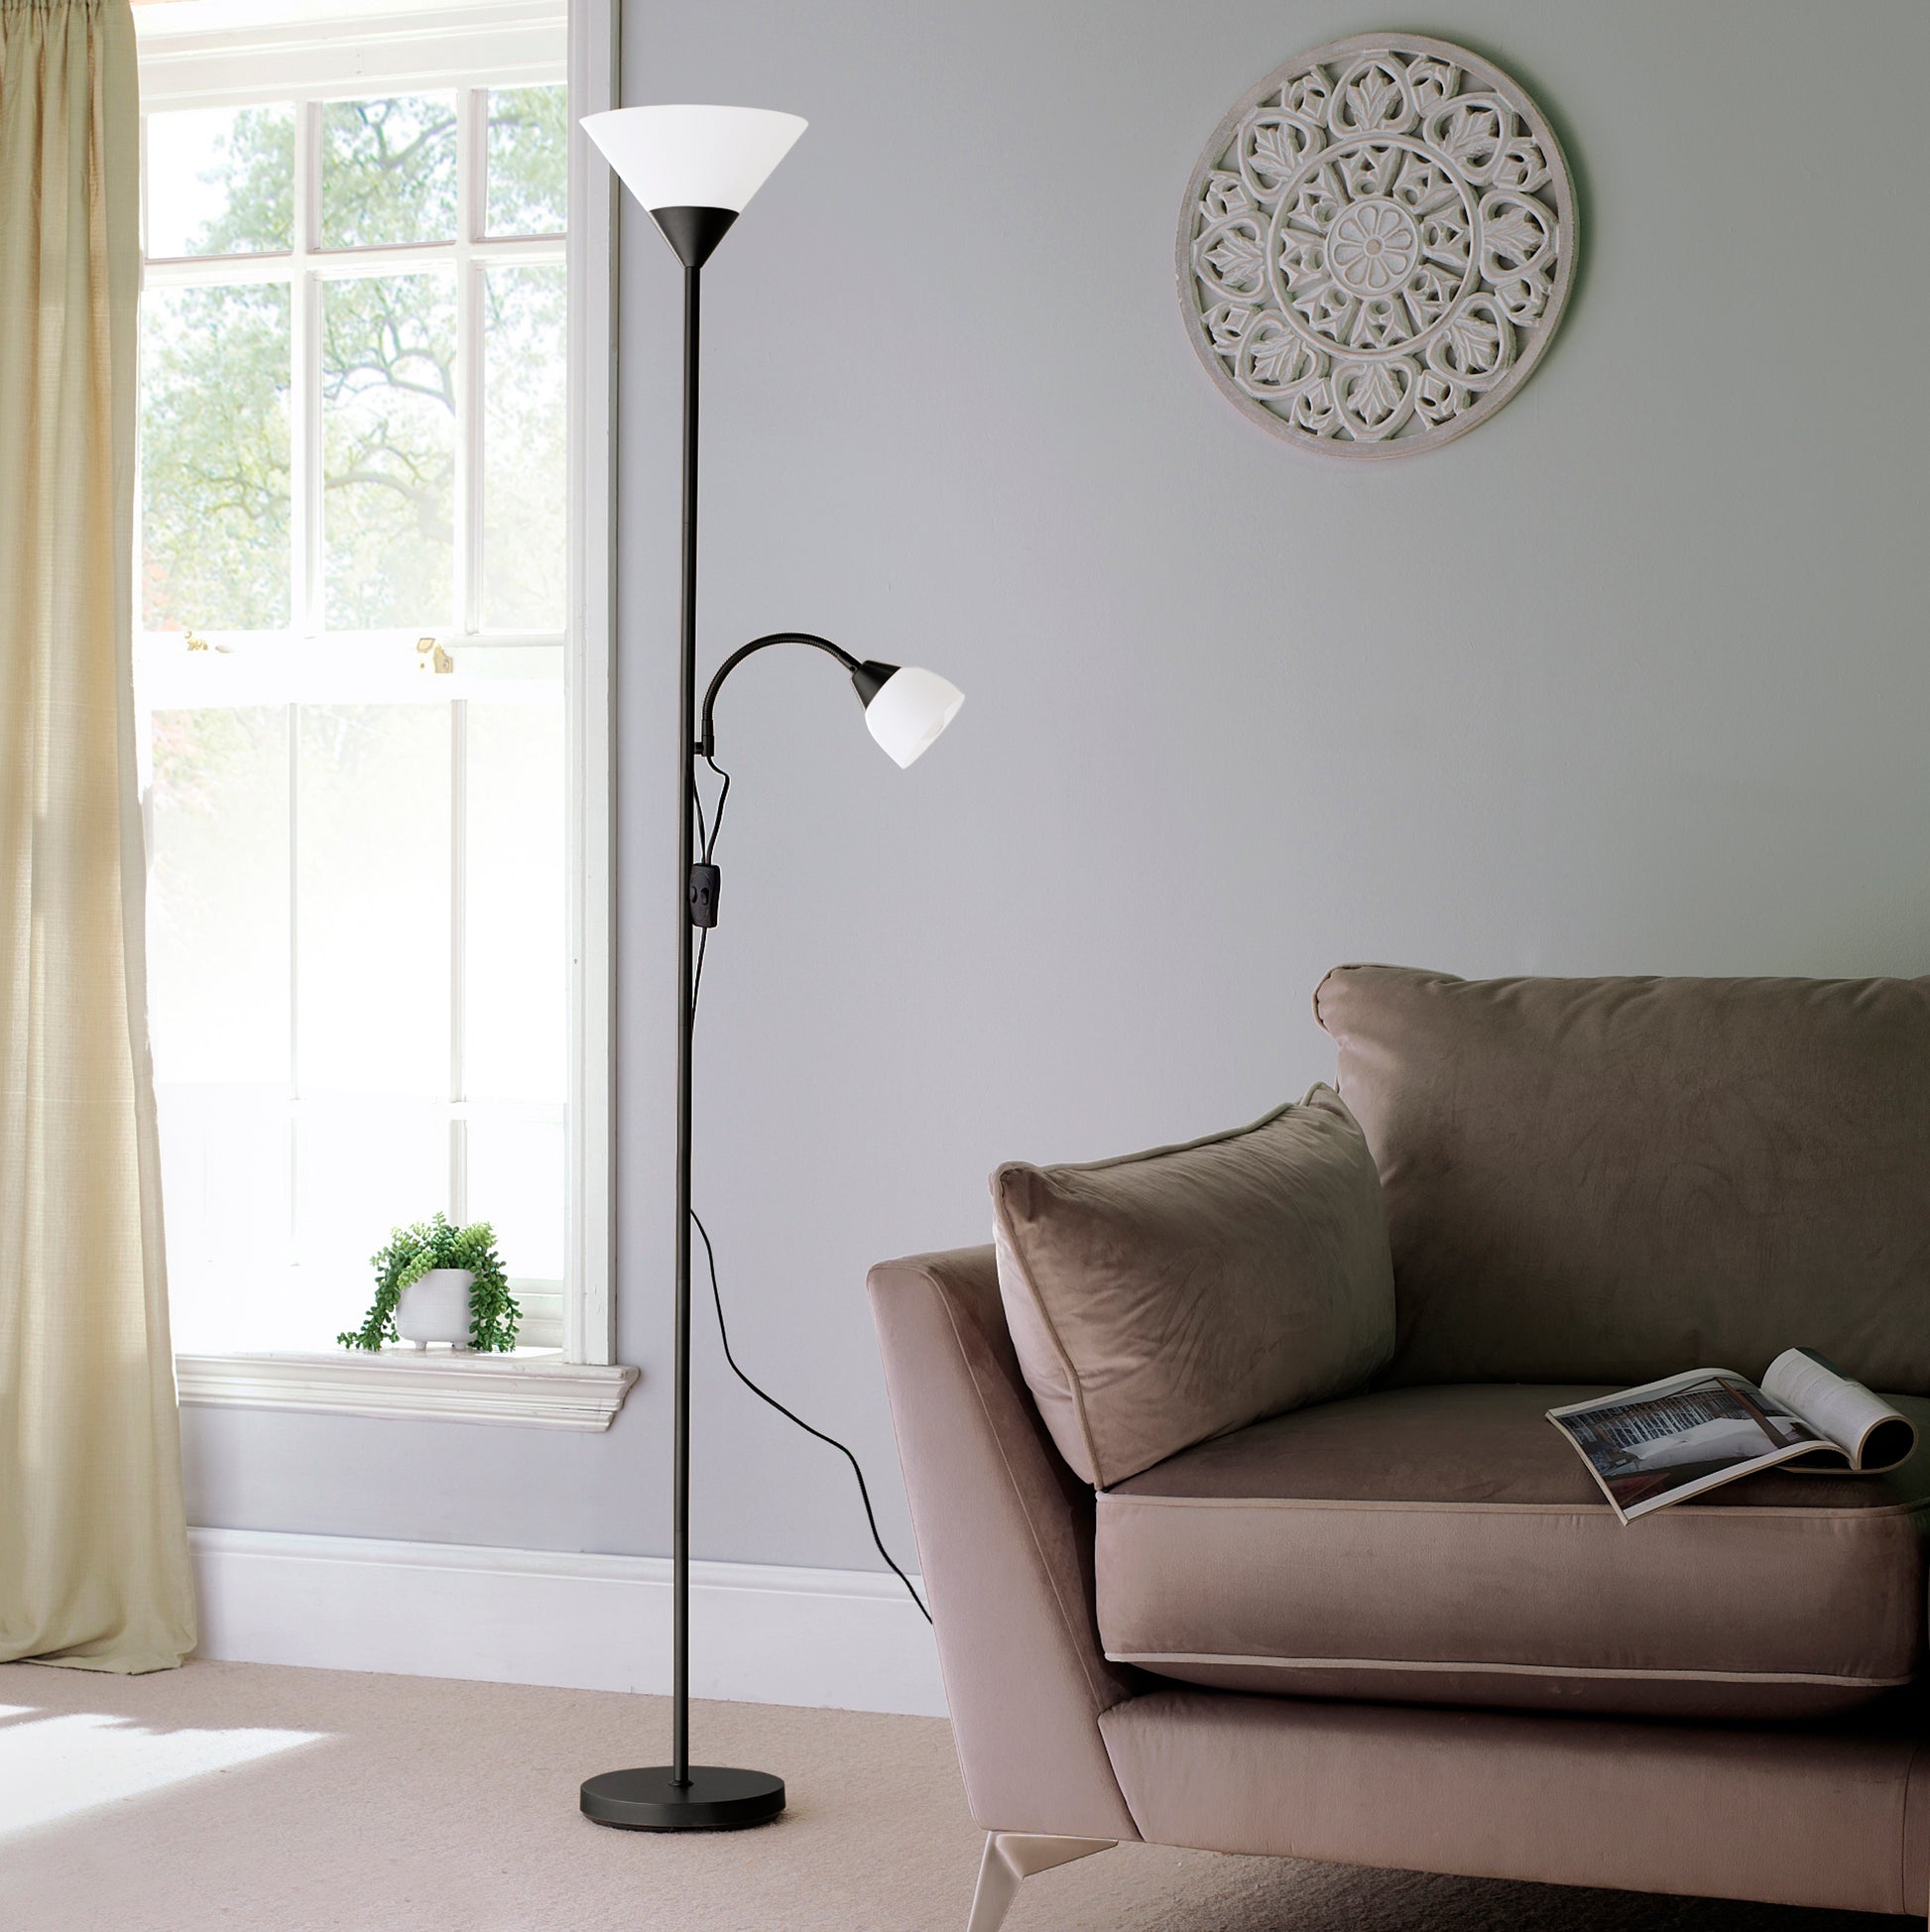 Black Floor Lamp with White Frosted Shades, Mother and Child Dual Switch Option for On or Off